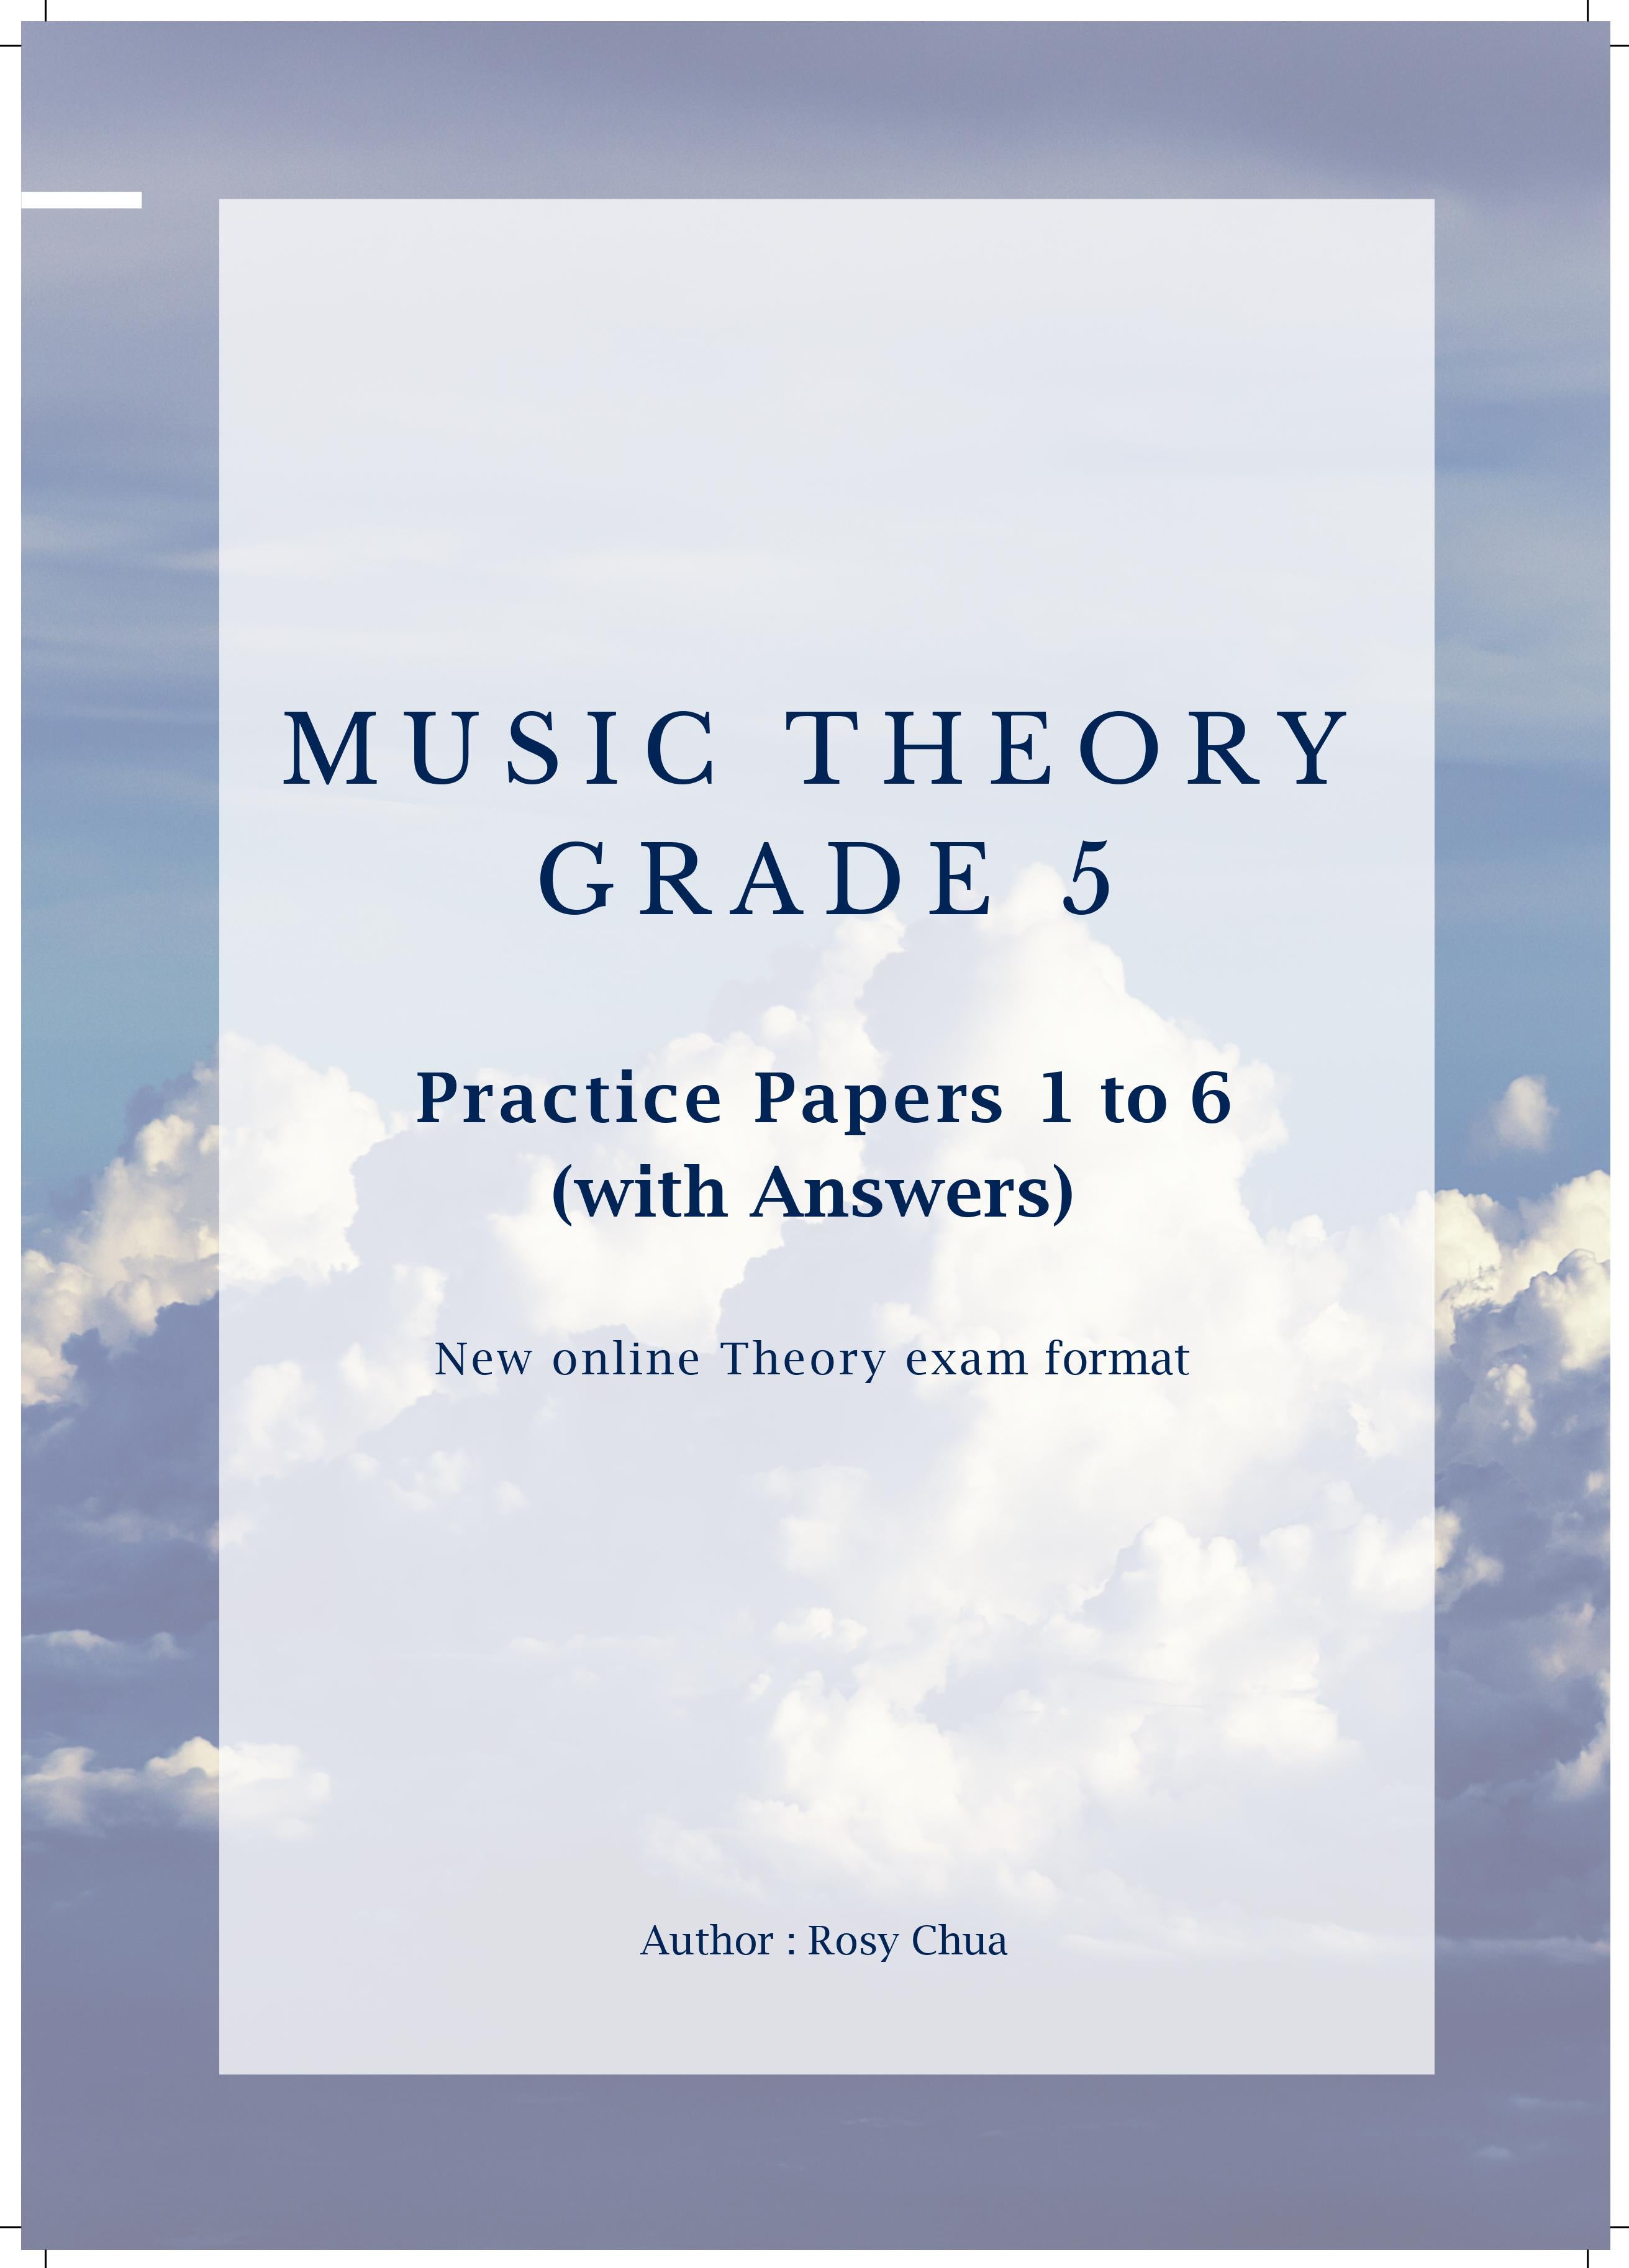 MUSIC THEORY GRADE 5 Practice Papers 1 to 6 (with answer) for new online theory exam format